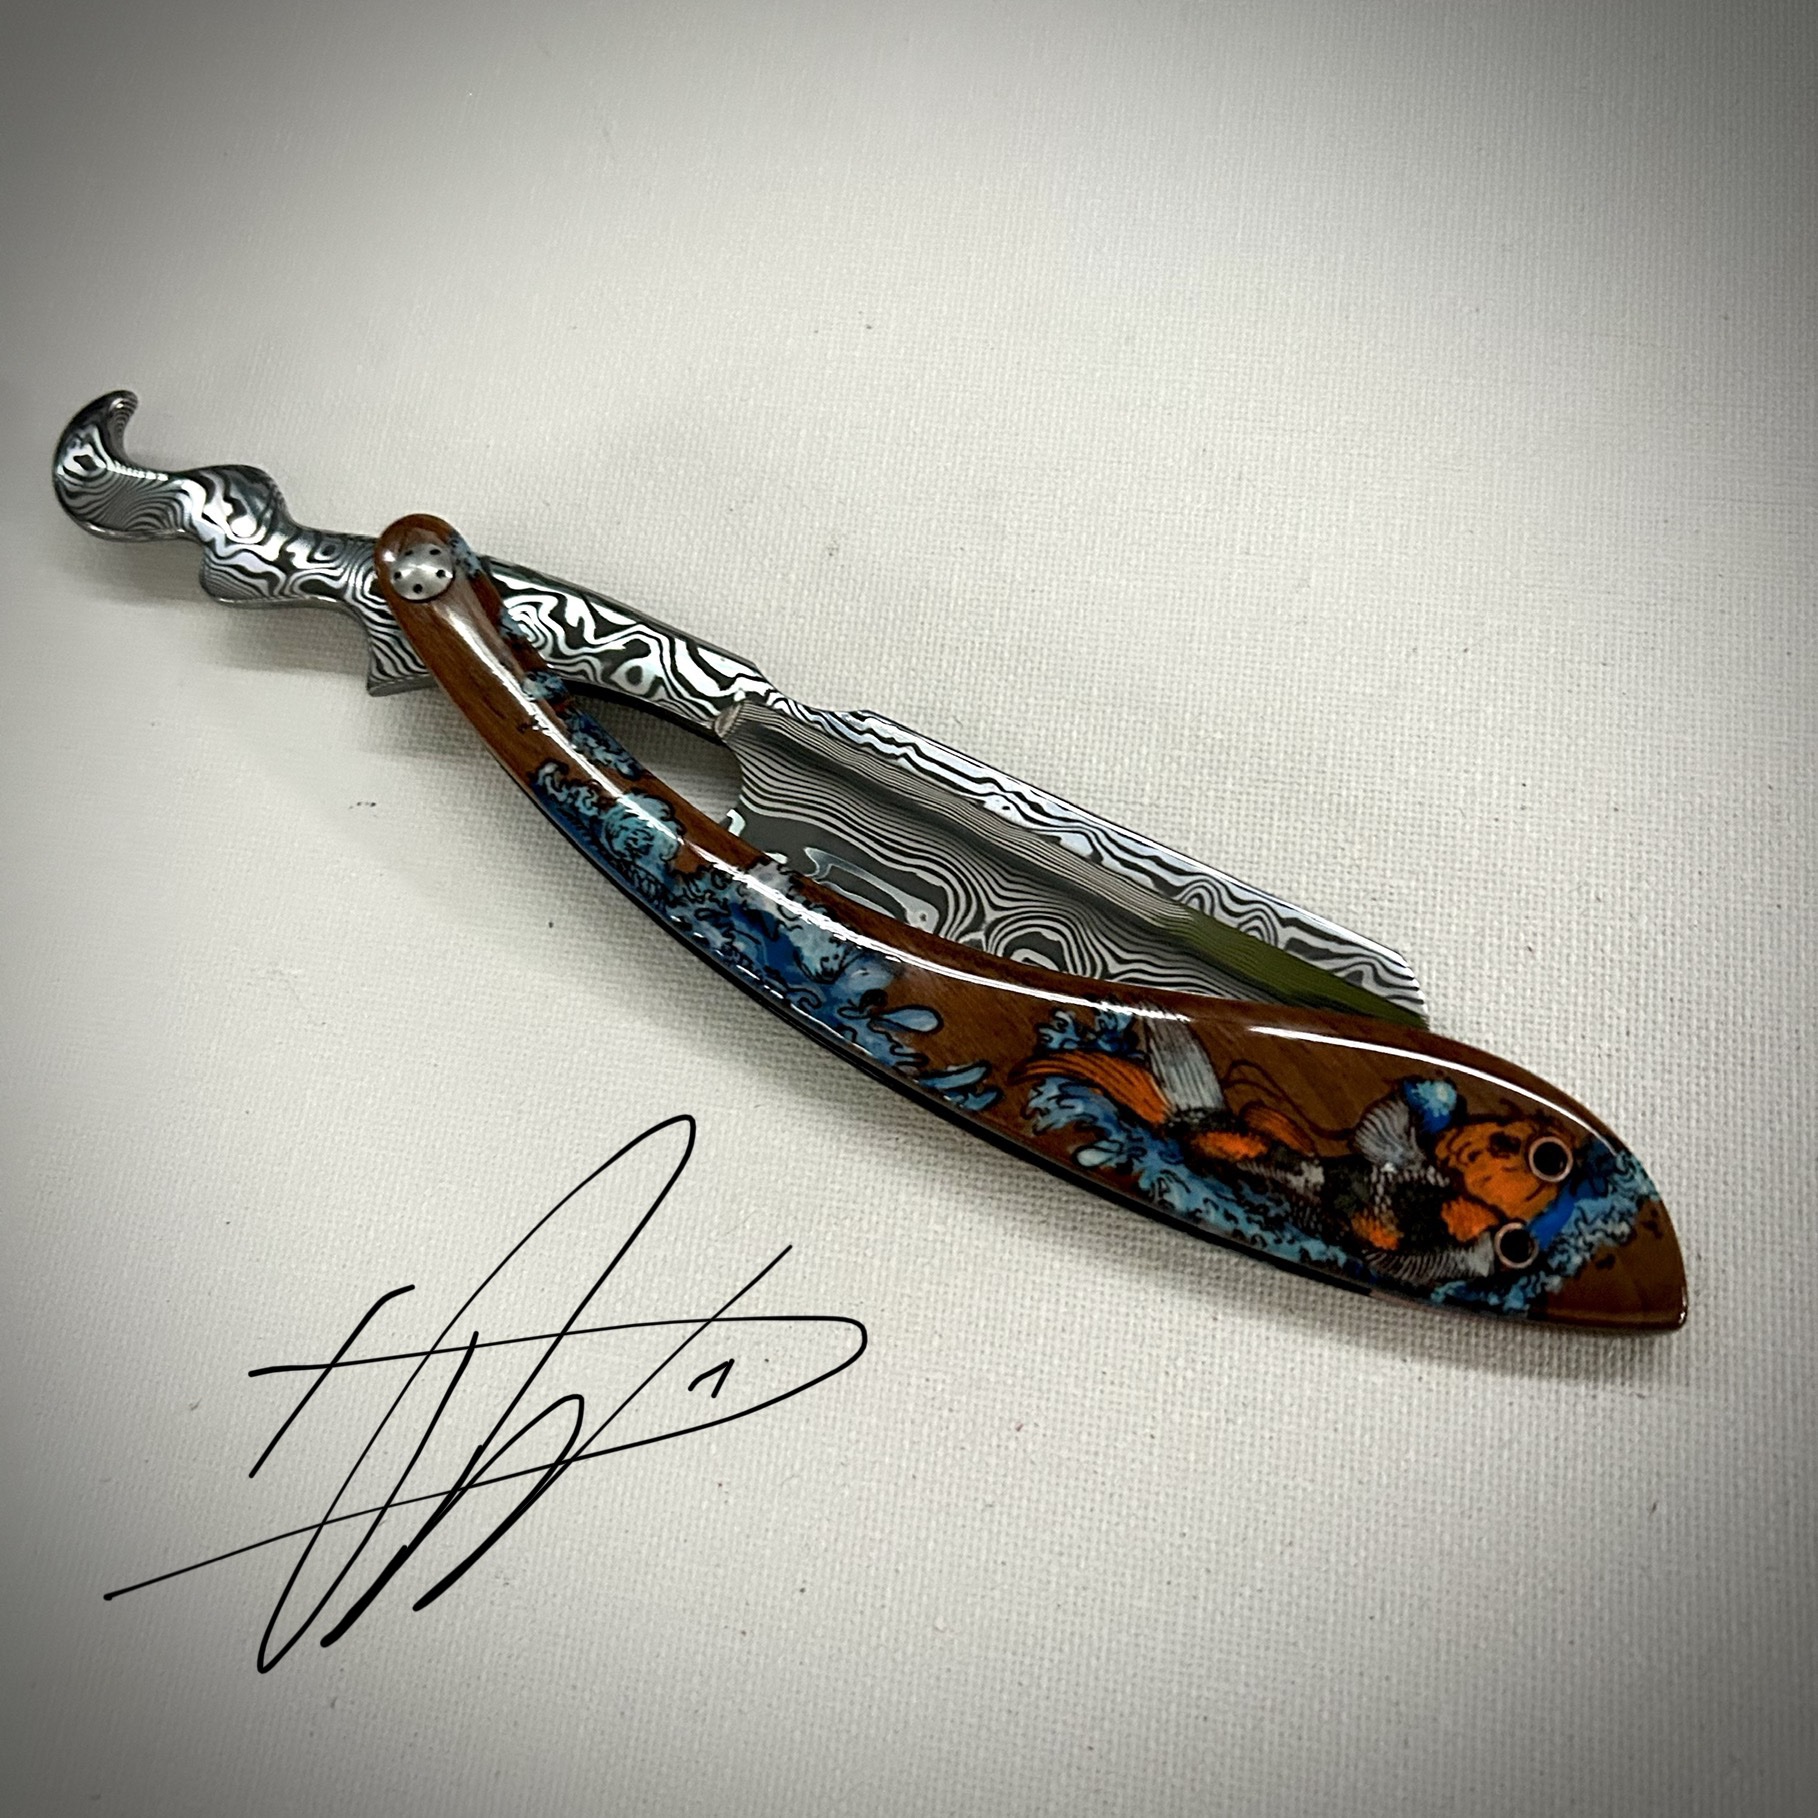 Woolfblades 348 Custom Made in a Vinland Damasteel razor ,And the scales are made in a solid wood with carbon fibre inlays the koi design is hand painted